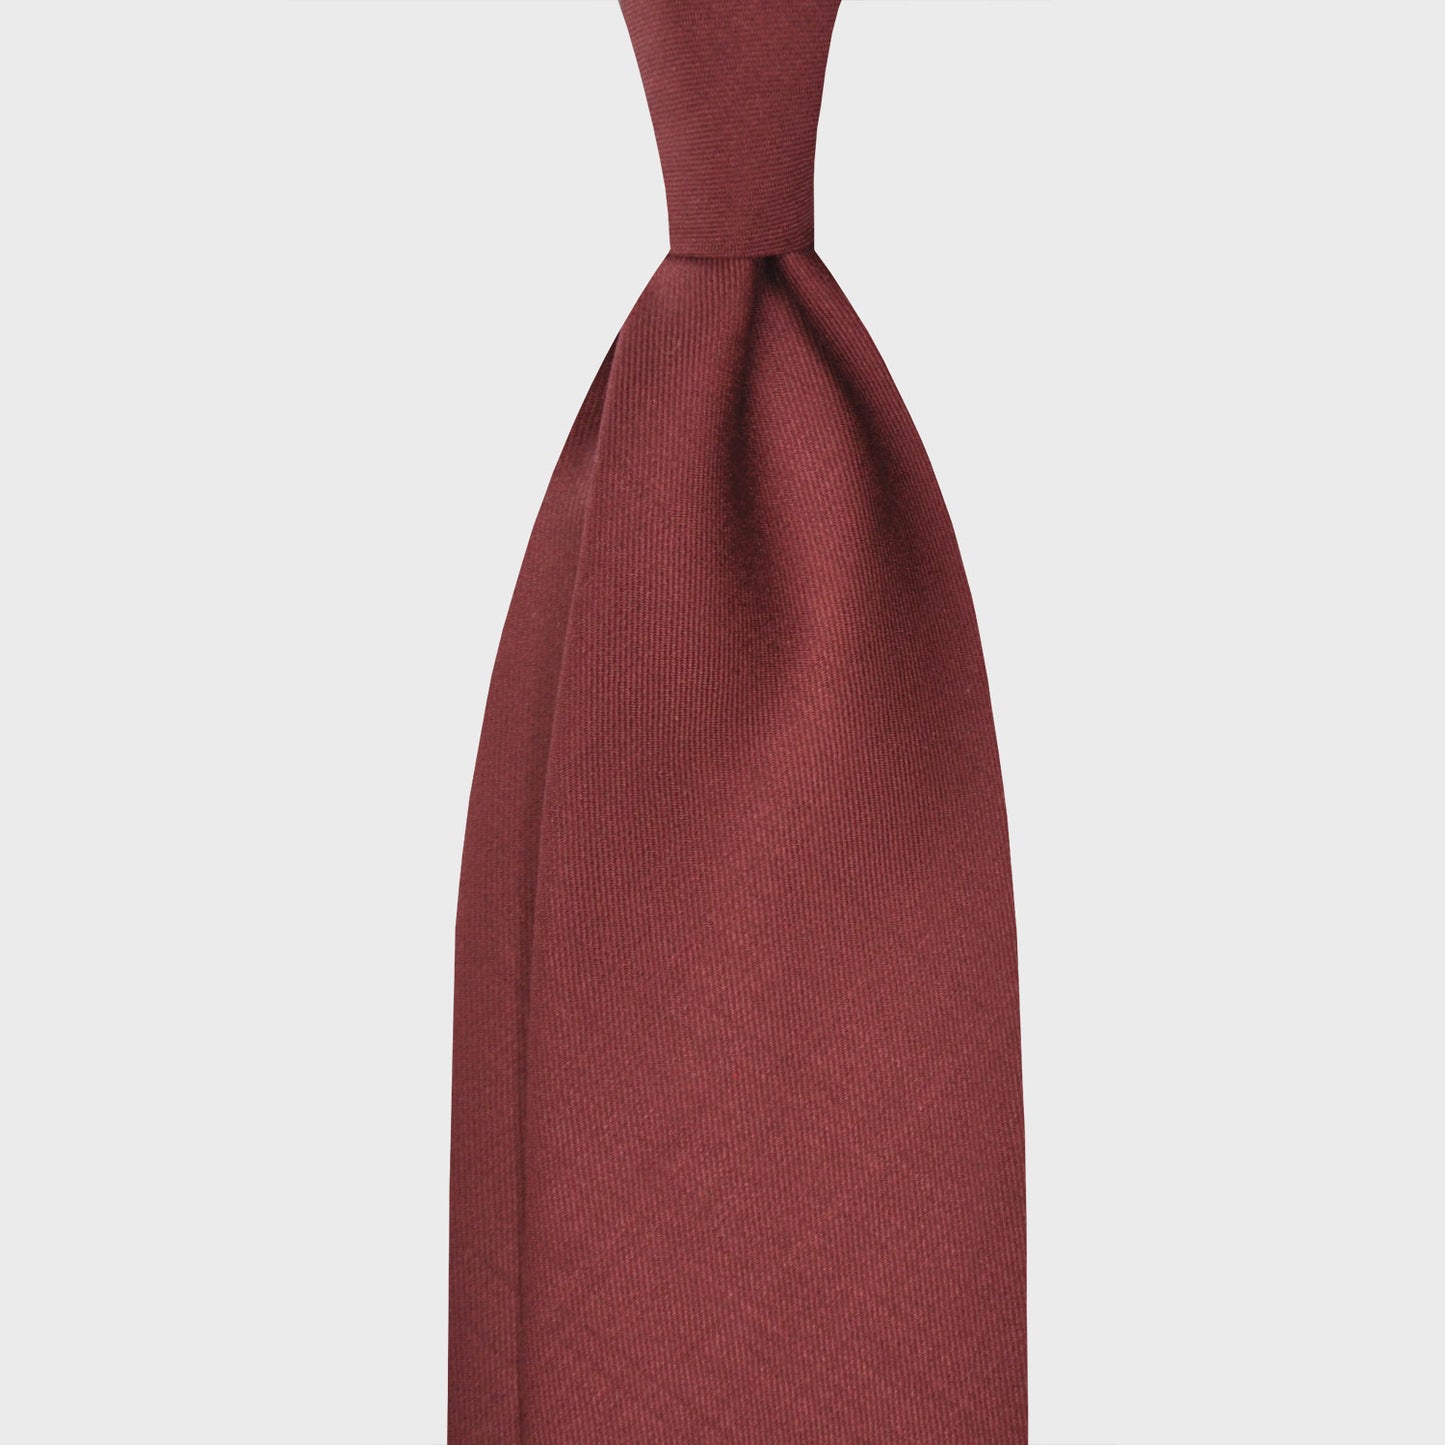 Burgundy Red Plain Tie Holland&Sherry Wool. Plain wool tie made with the Hollande & Sherry worsted wool, unlined 3 folds, soft and silky to the touch, burgundy red plain color, handmade tie F.Marino Napoli for Wools Boutique Uomo